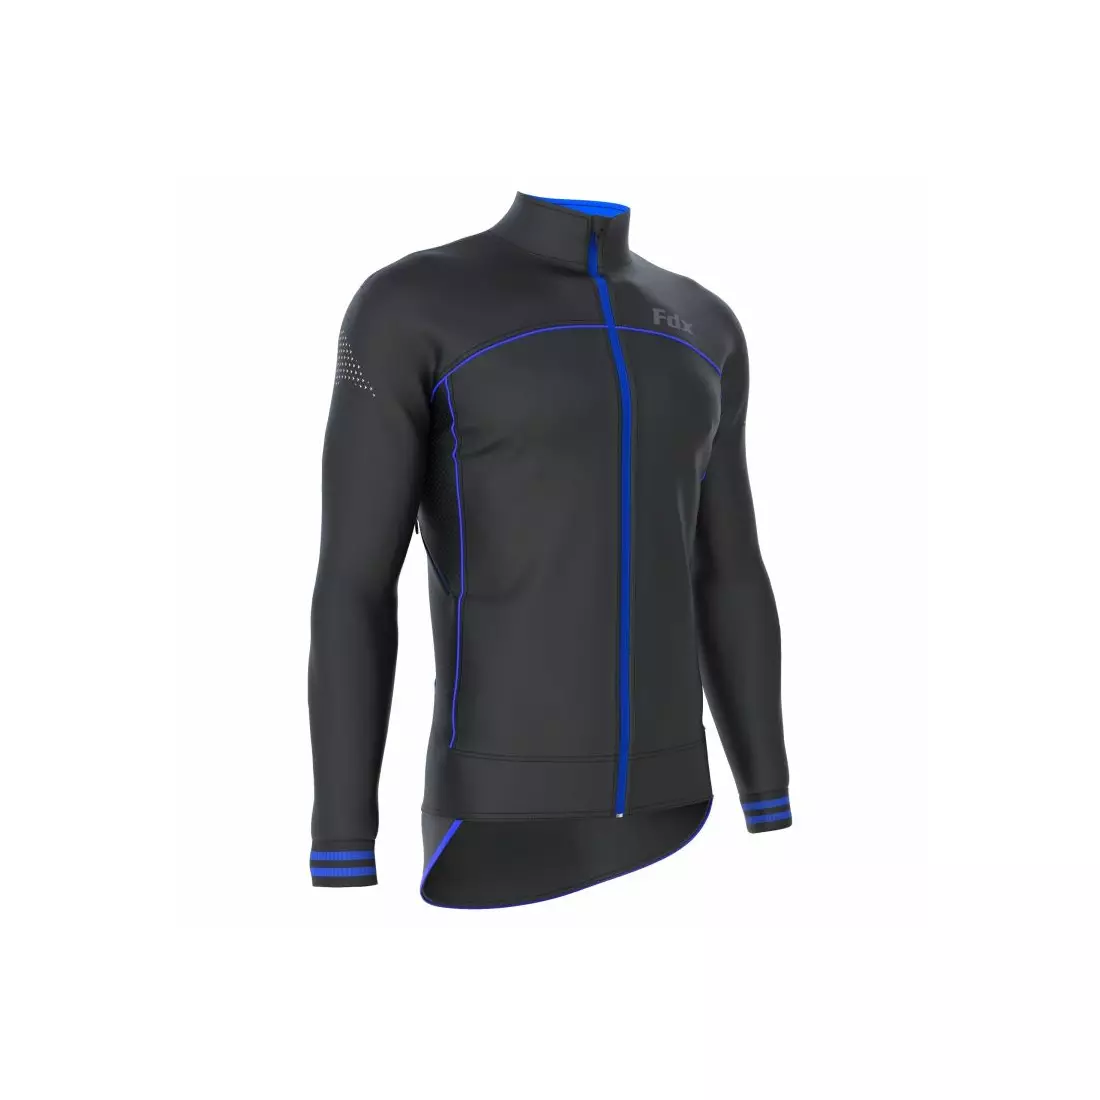 FDX 1310 men's insulated cycling jacket black and blue